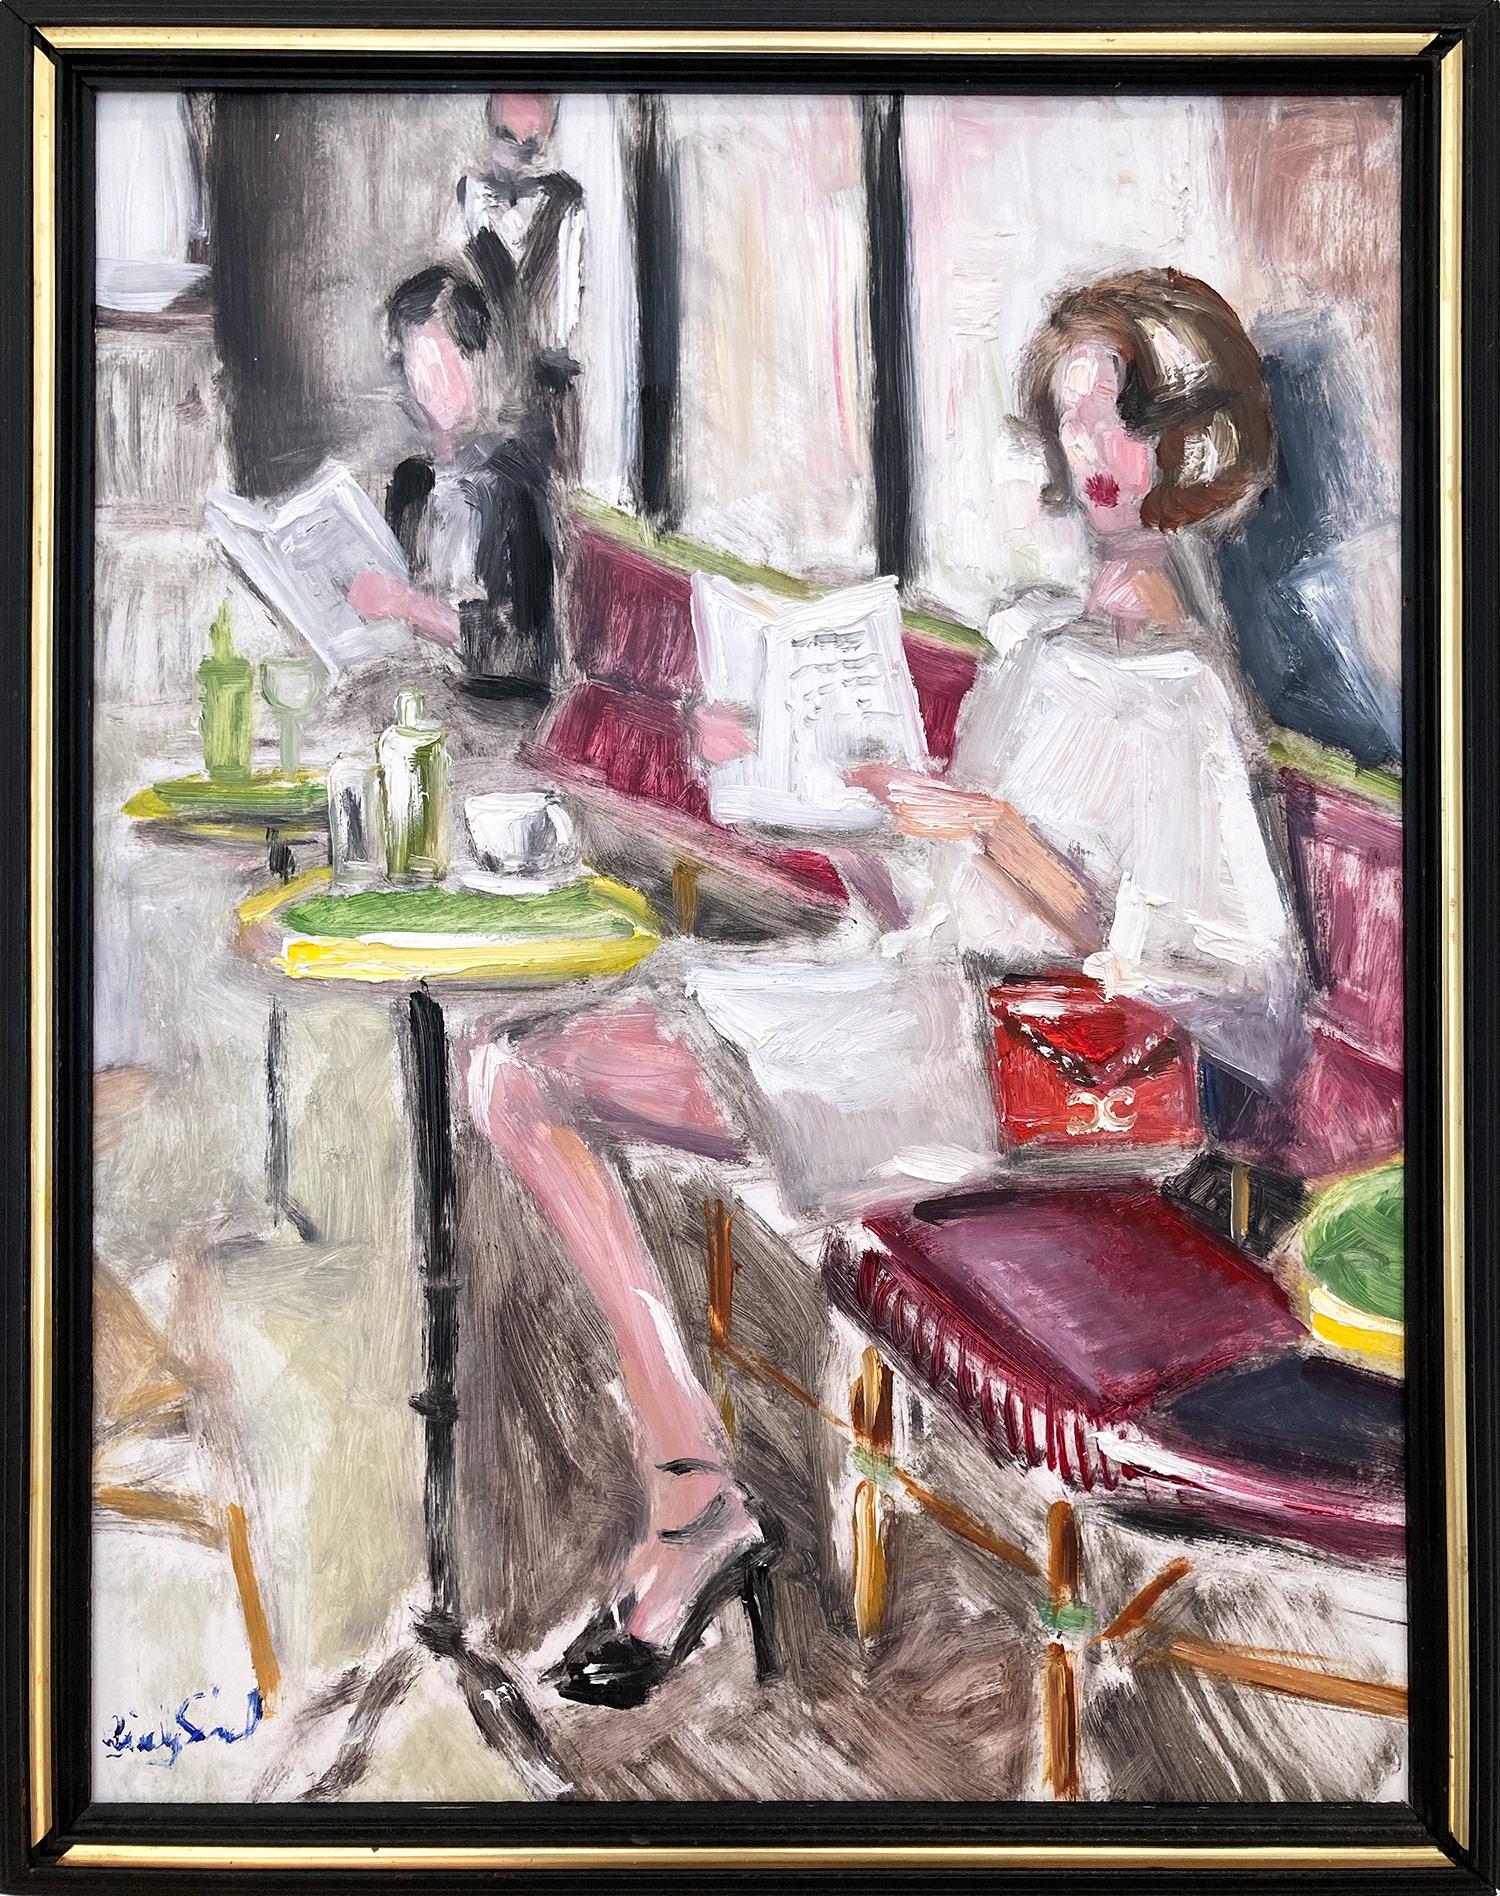 Cindy Shaoul Landscape Painting - "Meet me at the Paris Cafe" Impressionistic Oil Painting of Woman in Chanel